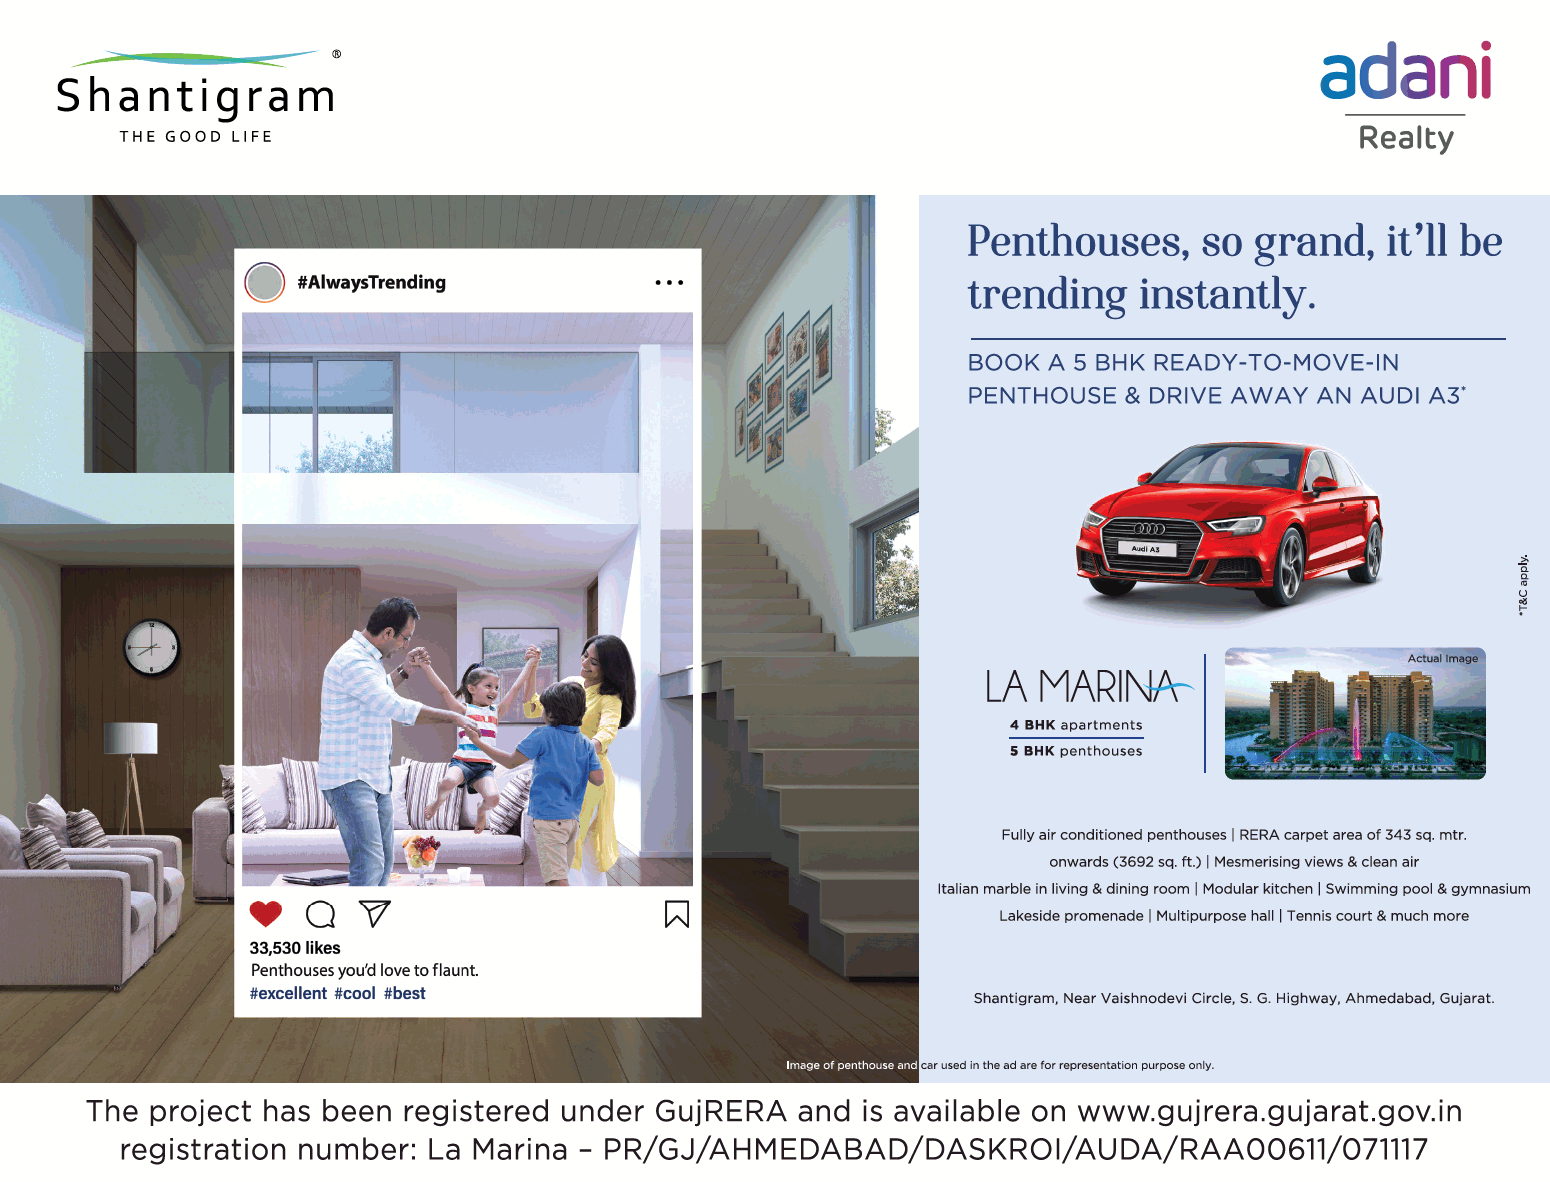 book a 5 BHK ready-to-move-in penthouse at Adani Shantigram La Marina, Ahmedabad Update